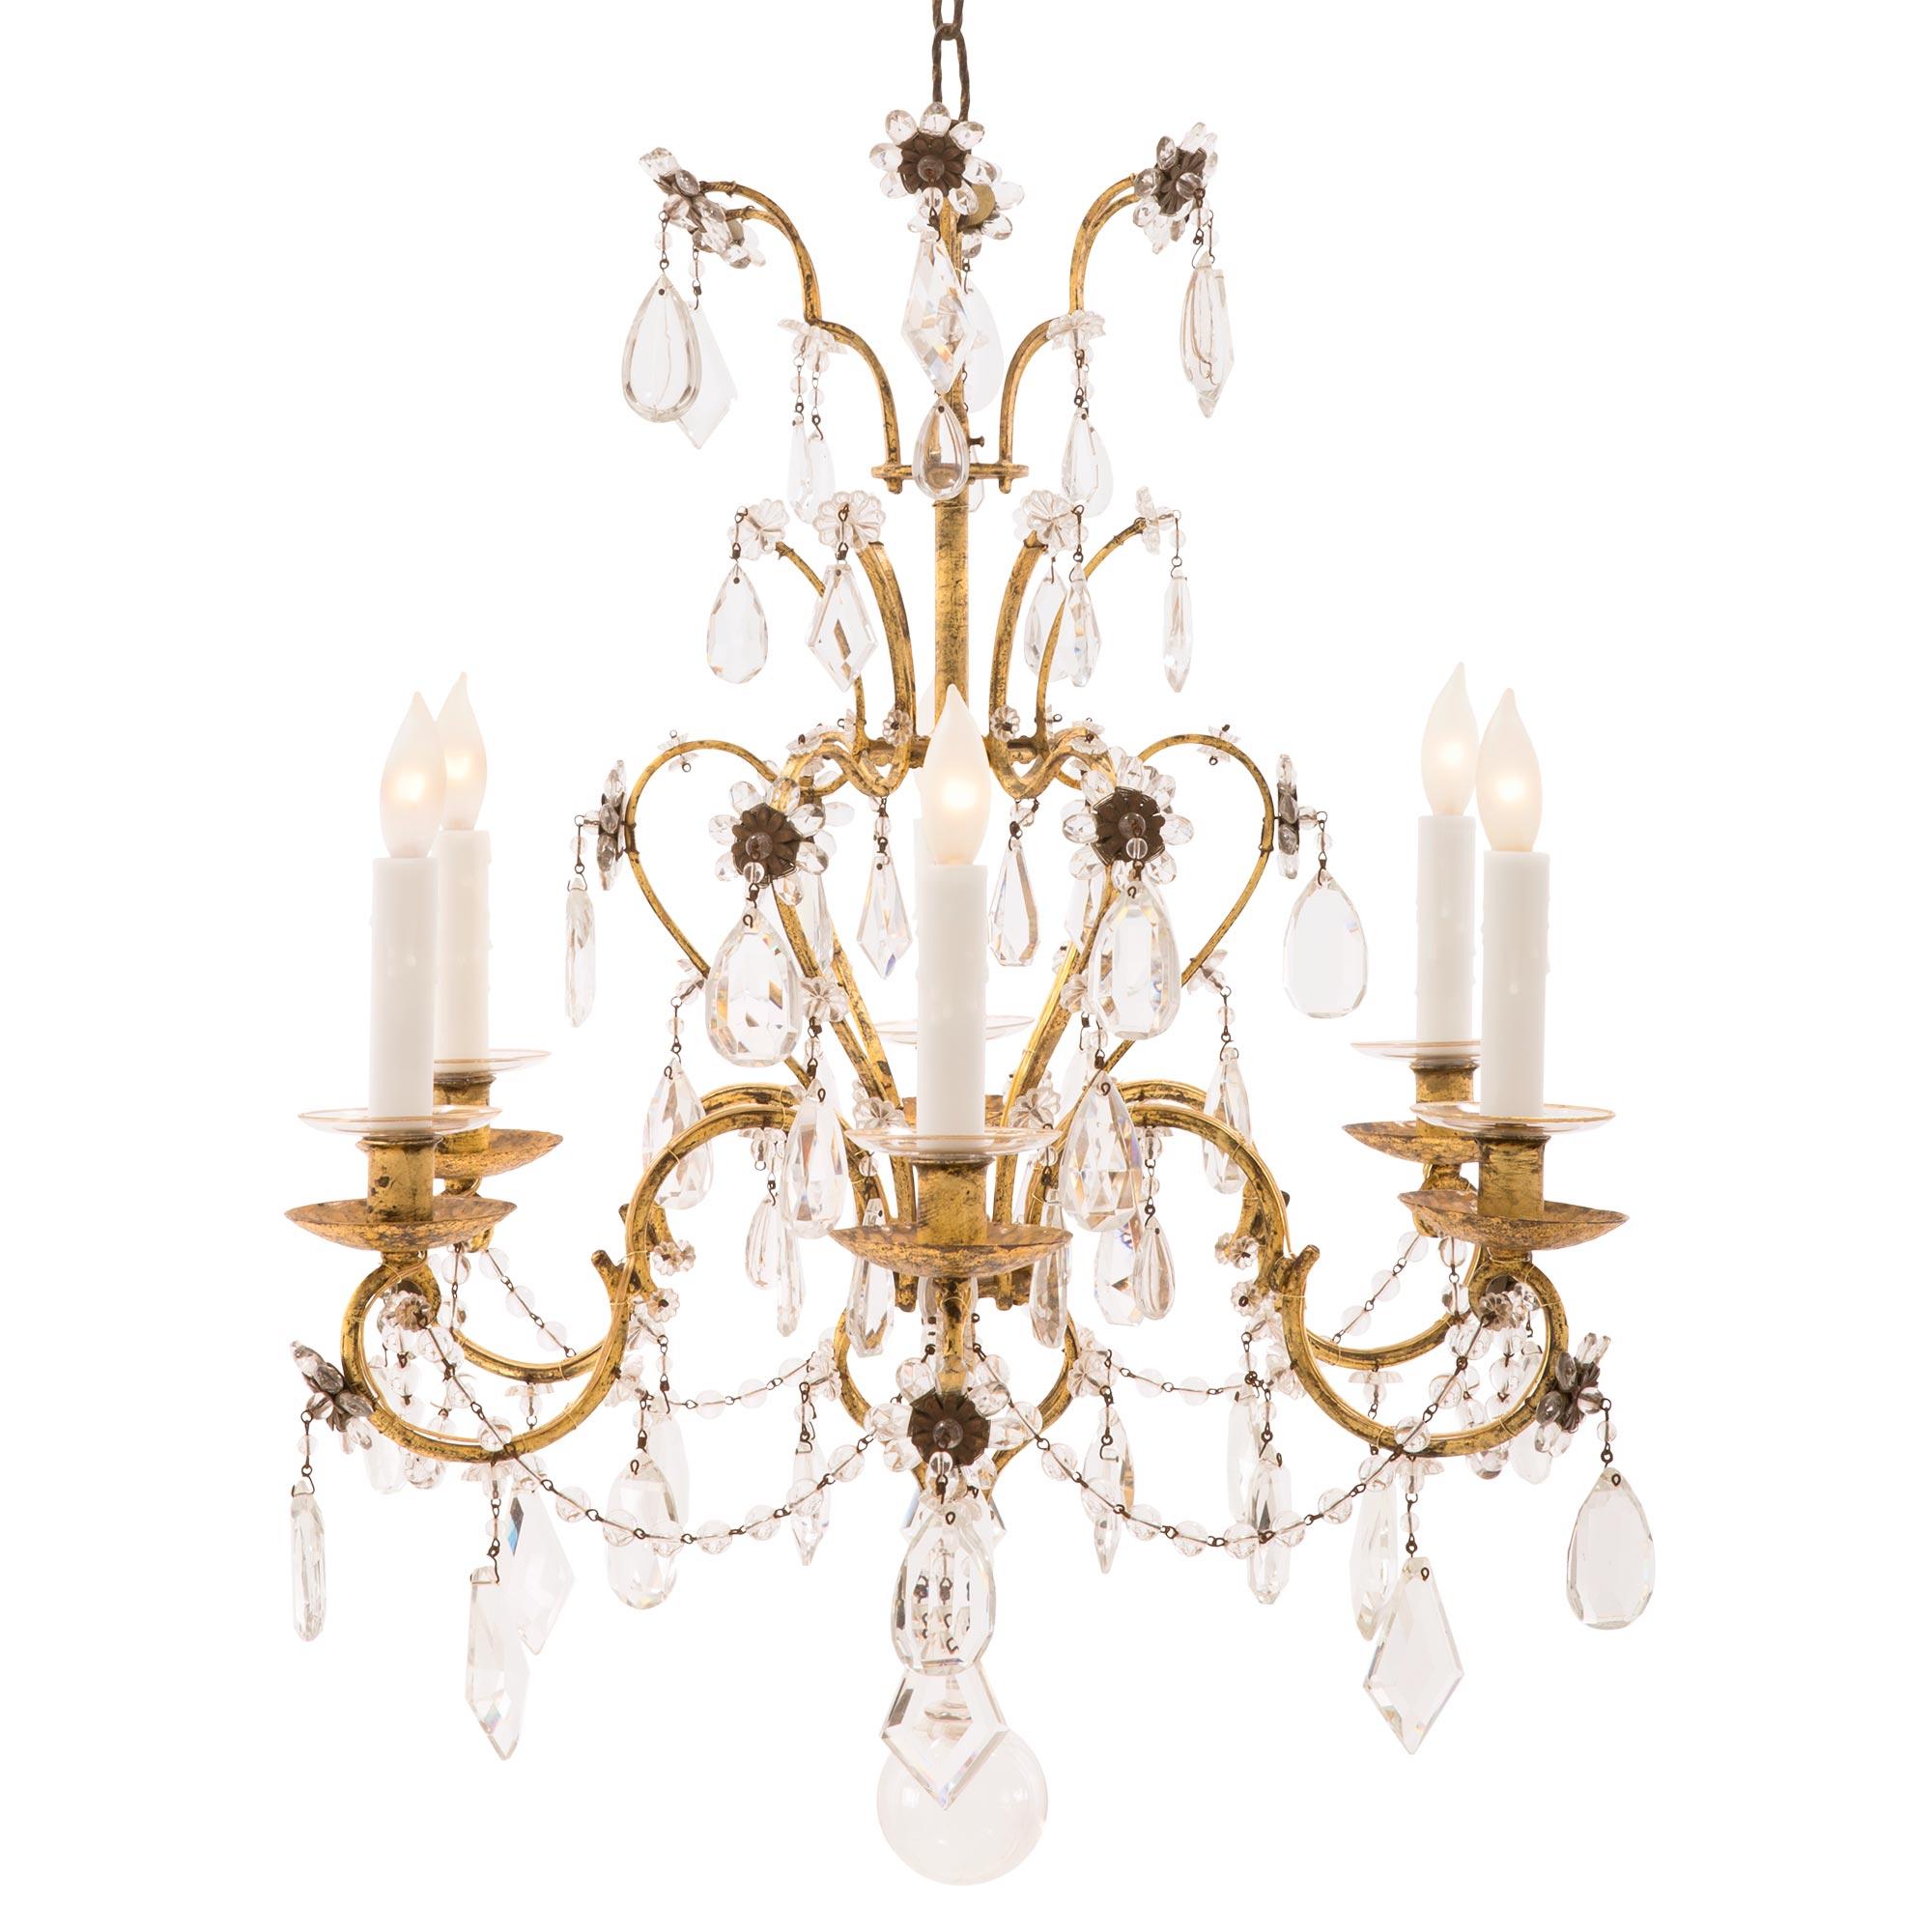 A beautiful and most decorative Italian 19th century Louis XV st. gilt metal, crystal, and cut glass chandelier. The six arm chandelier is centered by a lovely hand blown glass ball pendant below the beautifully scrolled gilt metal cage. The